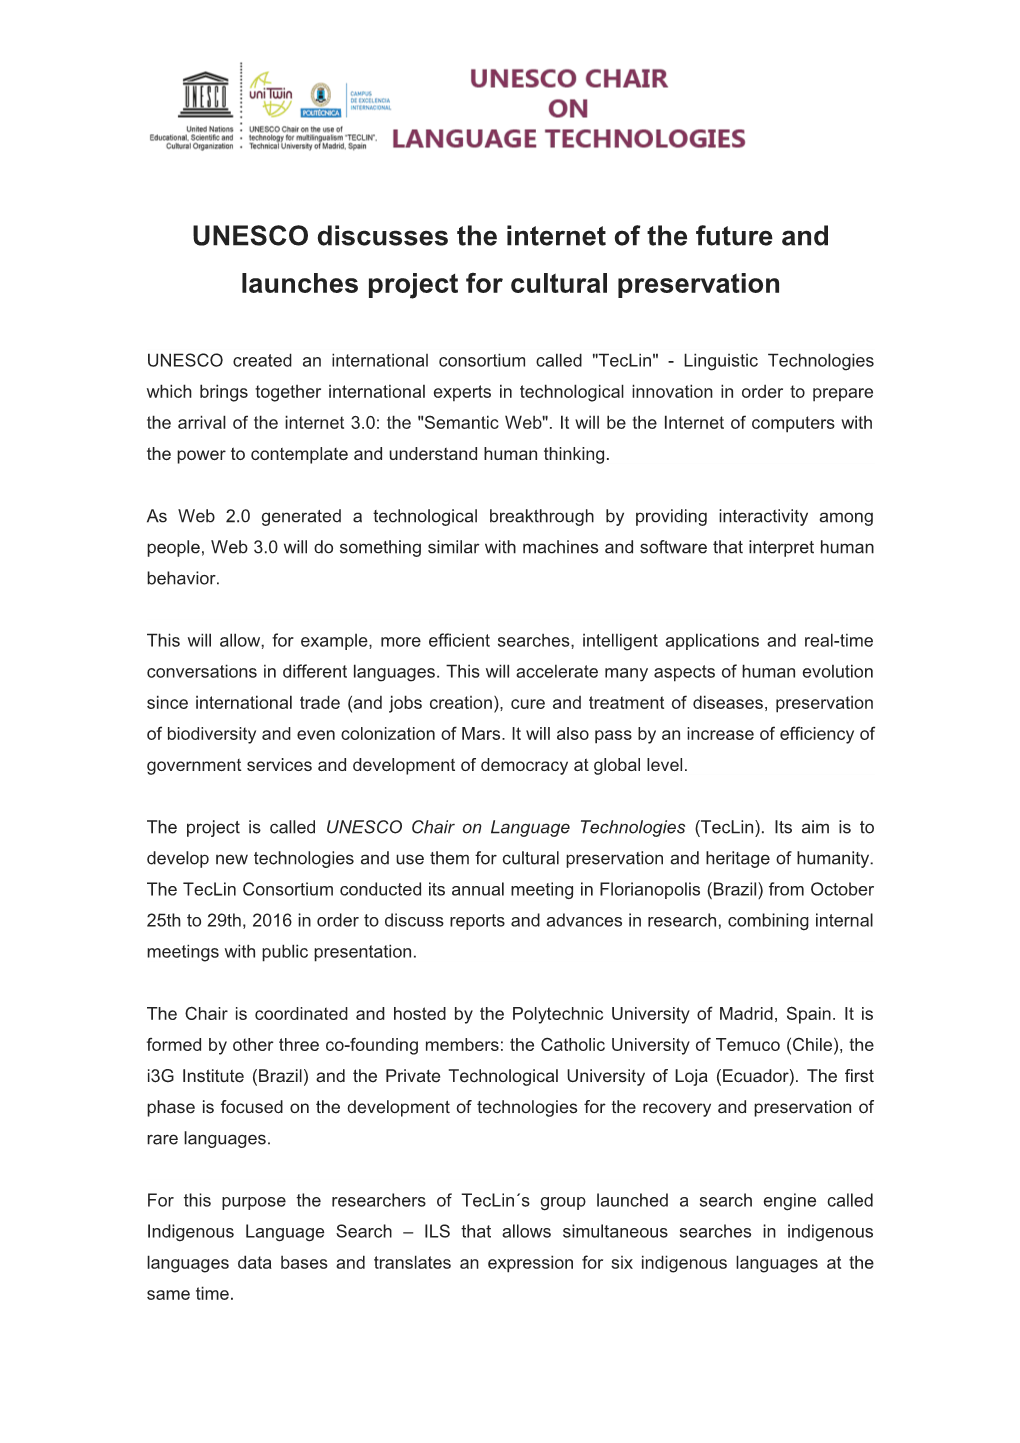 UNESCO Discusses the Internet of the Future and Launches Project for Cultural Preservation